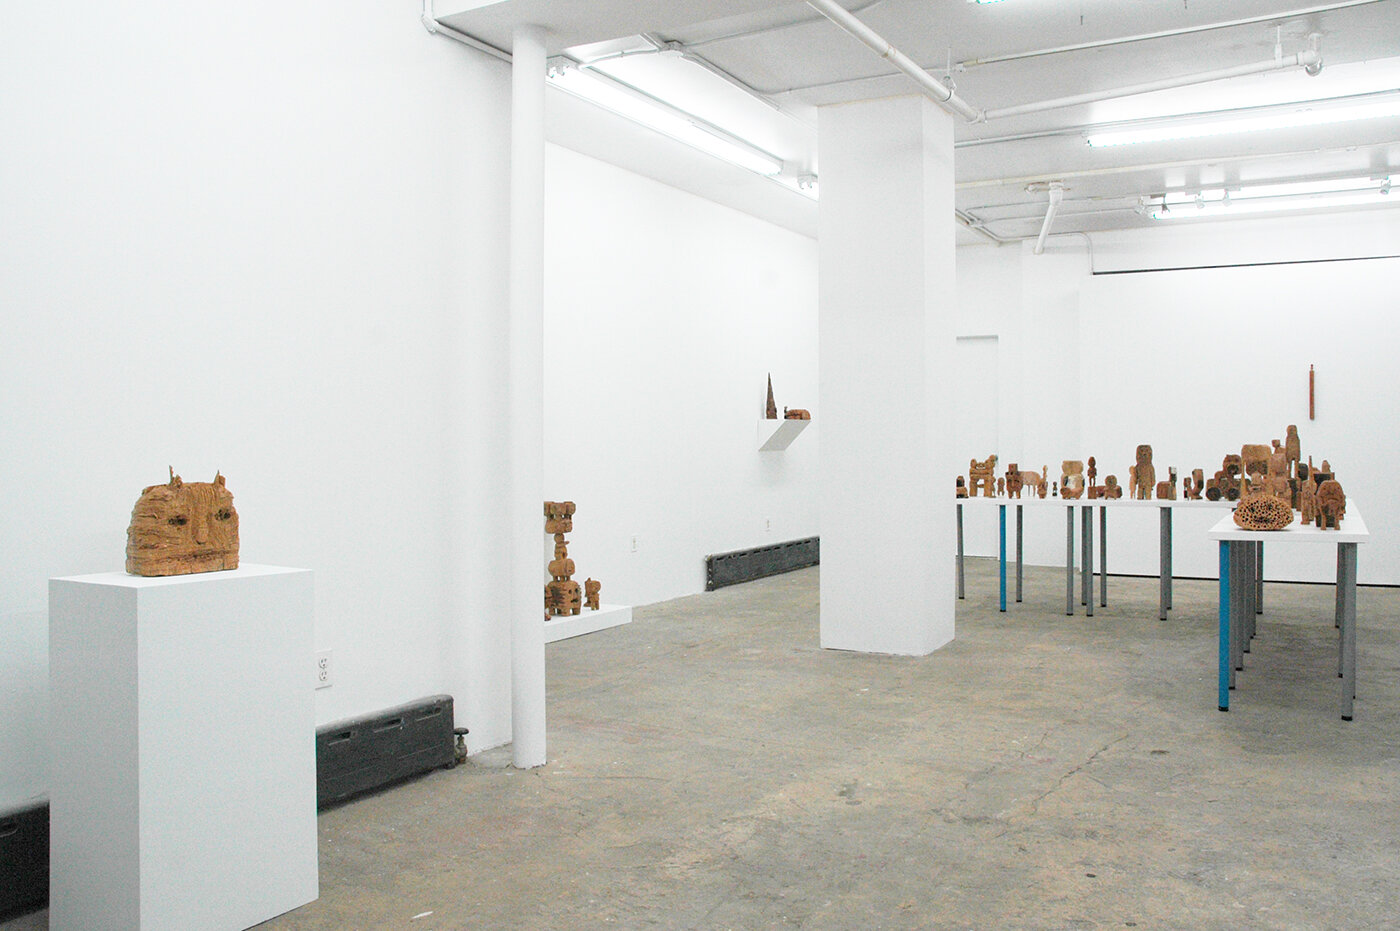 Installation image of sculptures by Hirosuke Yabe from his 2018 exhibition, Faithful Dog Man, at Cindy Rucker Gallery